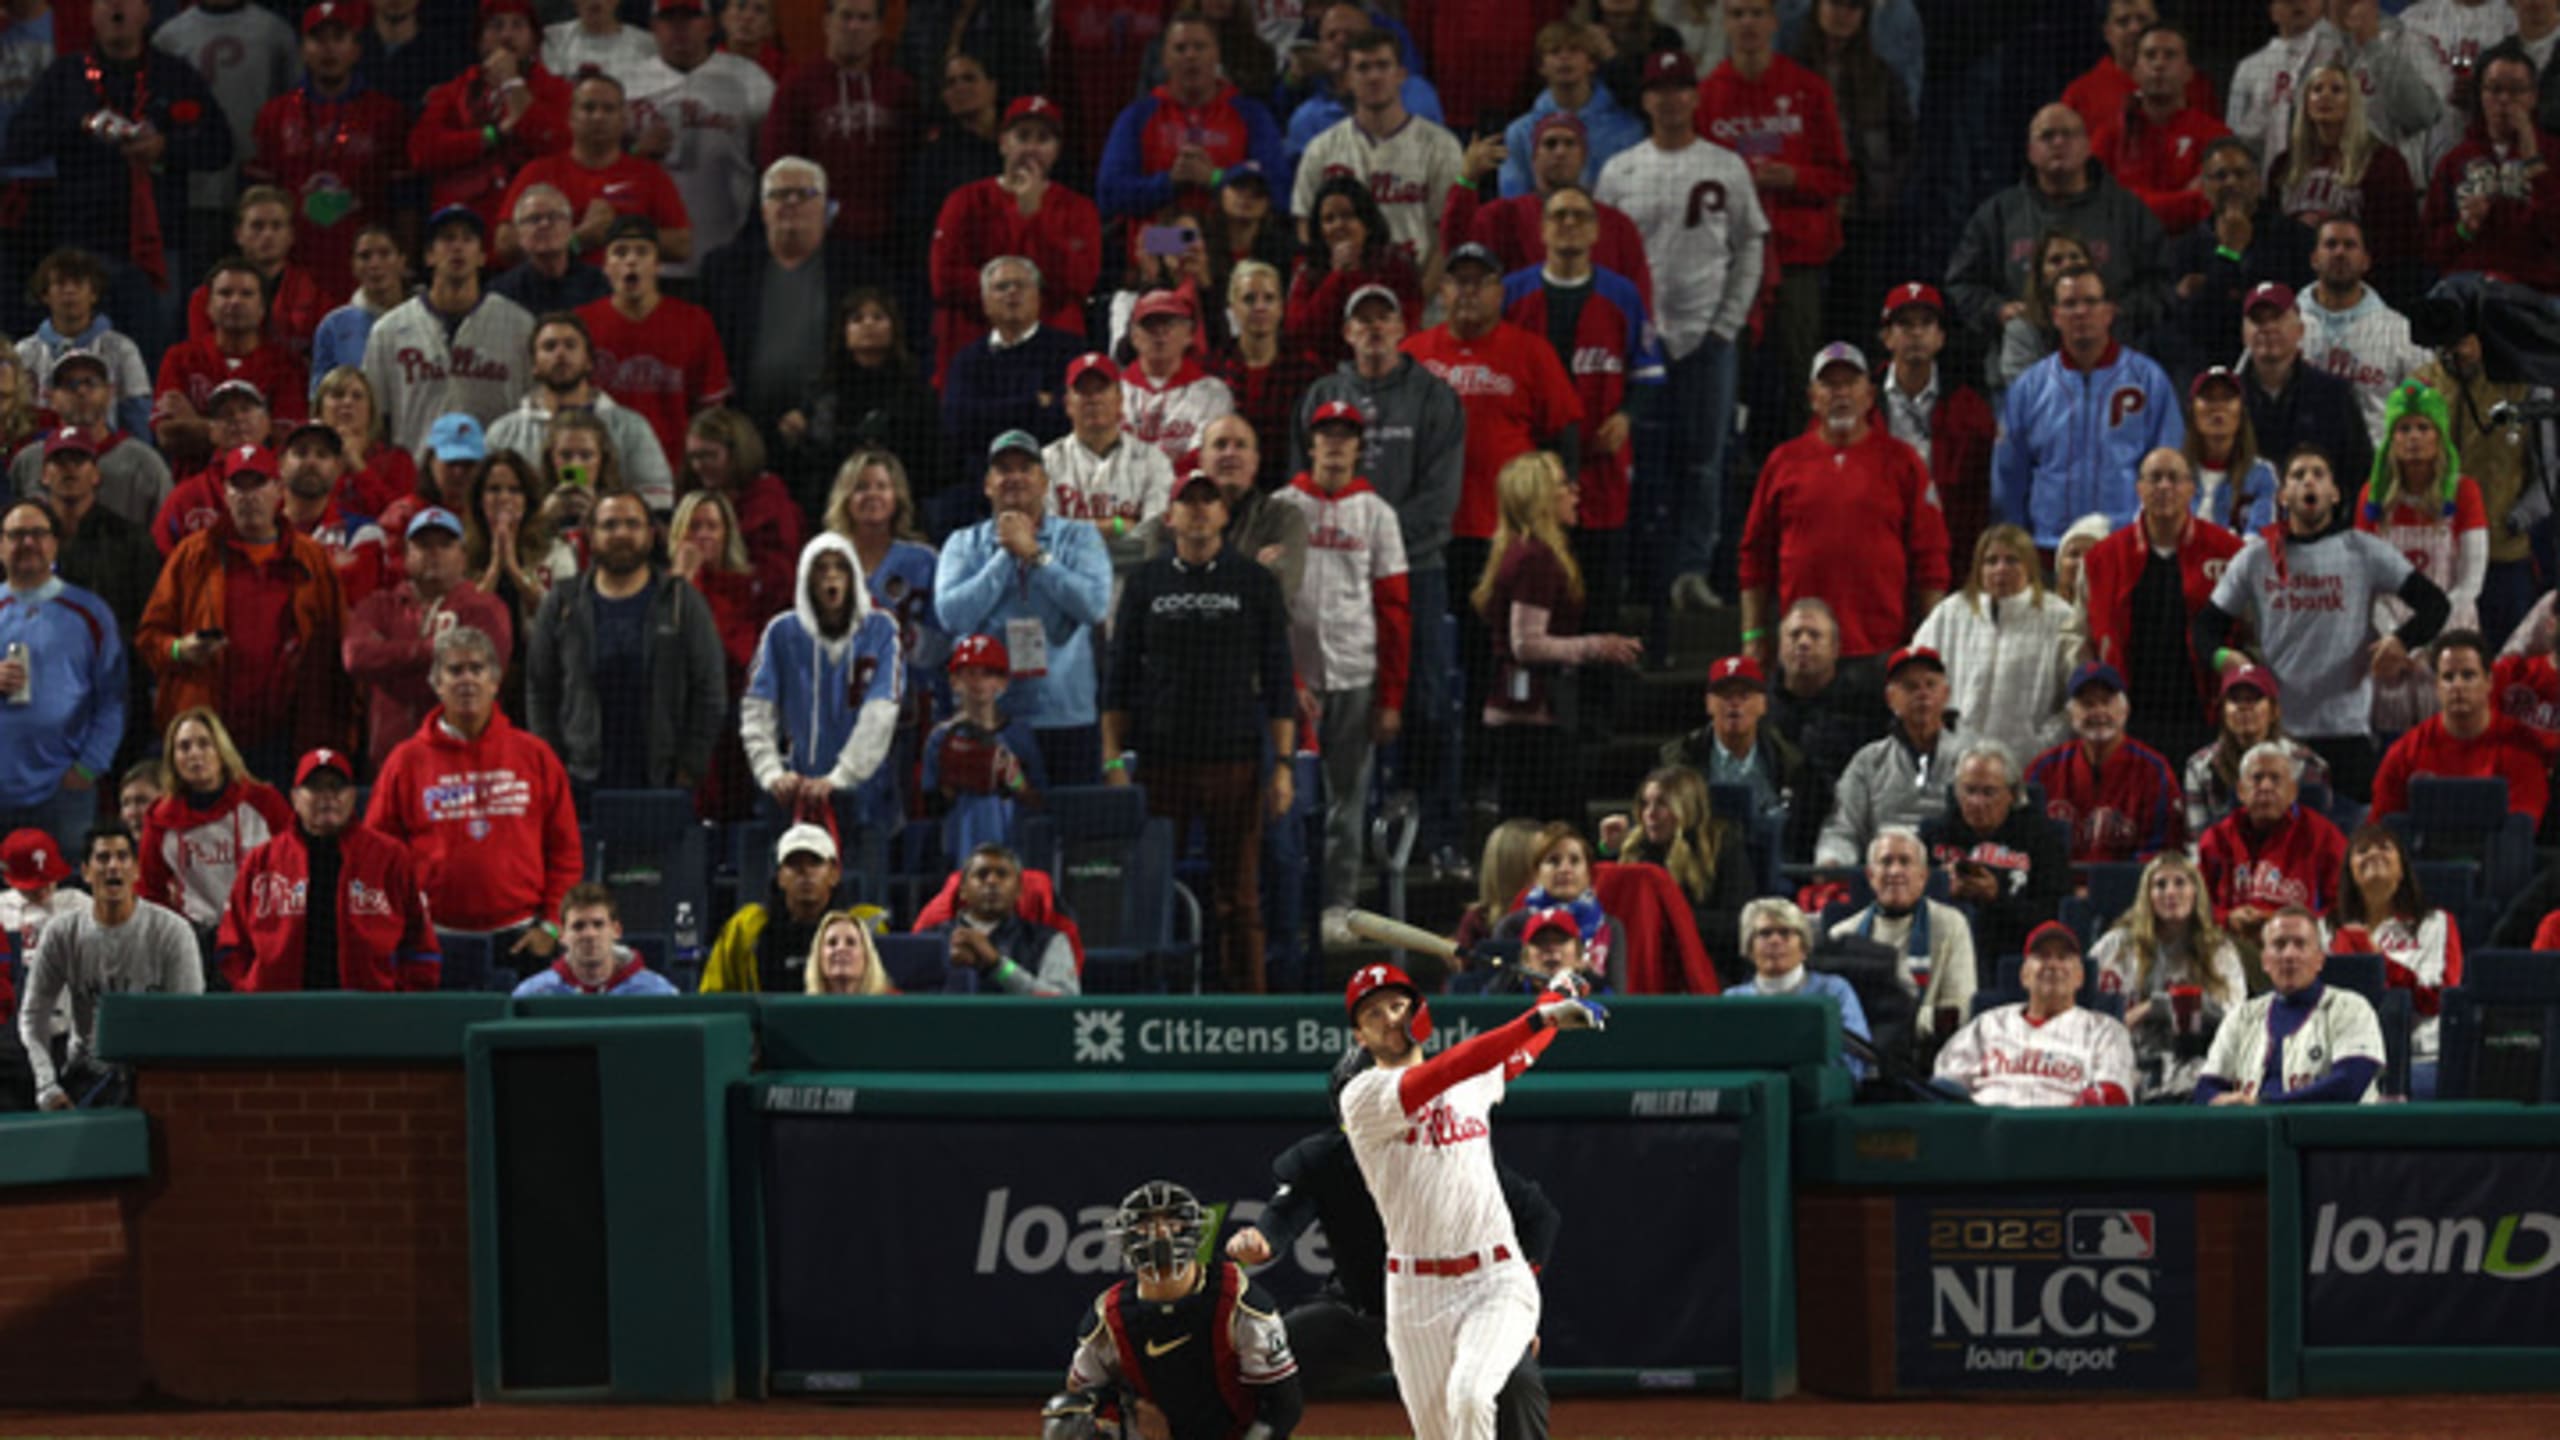 Kyle Schwarber, Aaron Nola lead Phillies to 10-0 rout of D-backs, 2-0 lead  in NLCS - Chicago Sun-Times